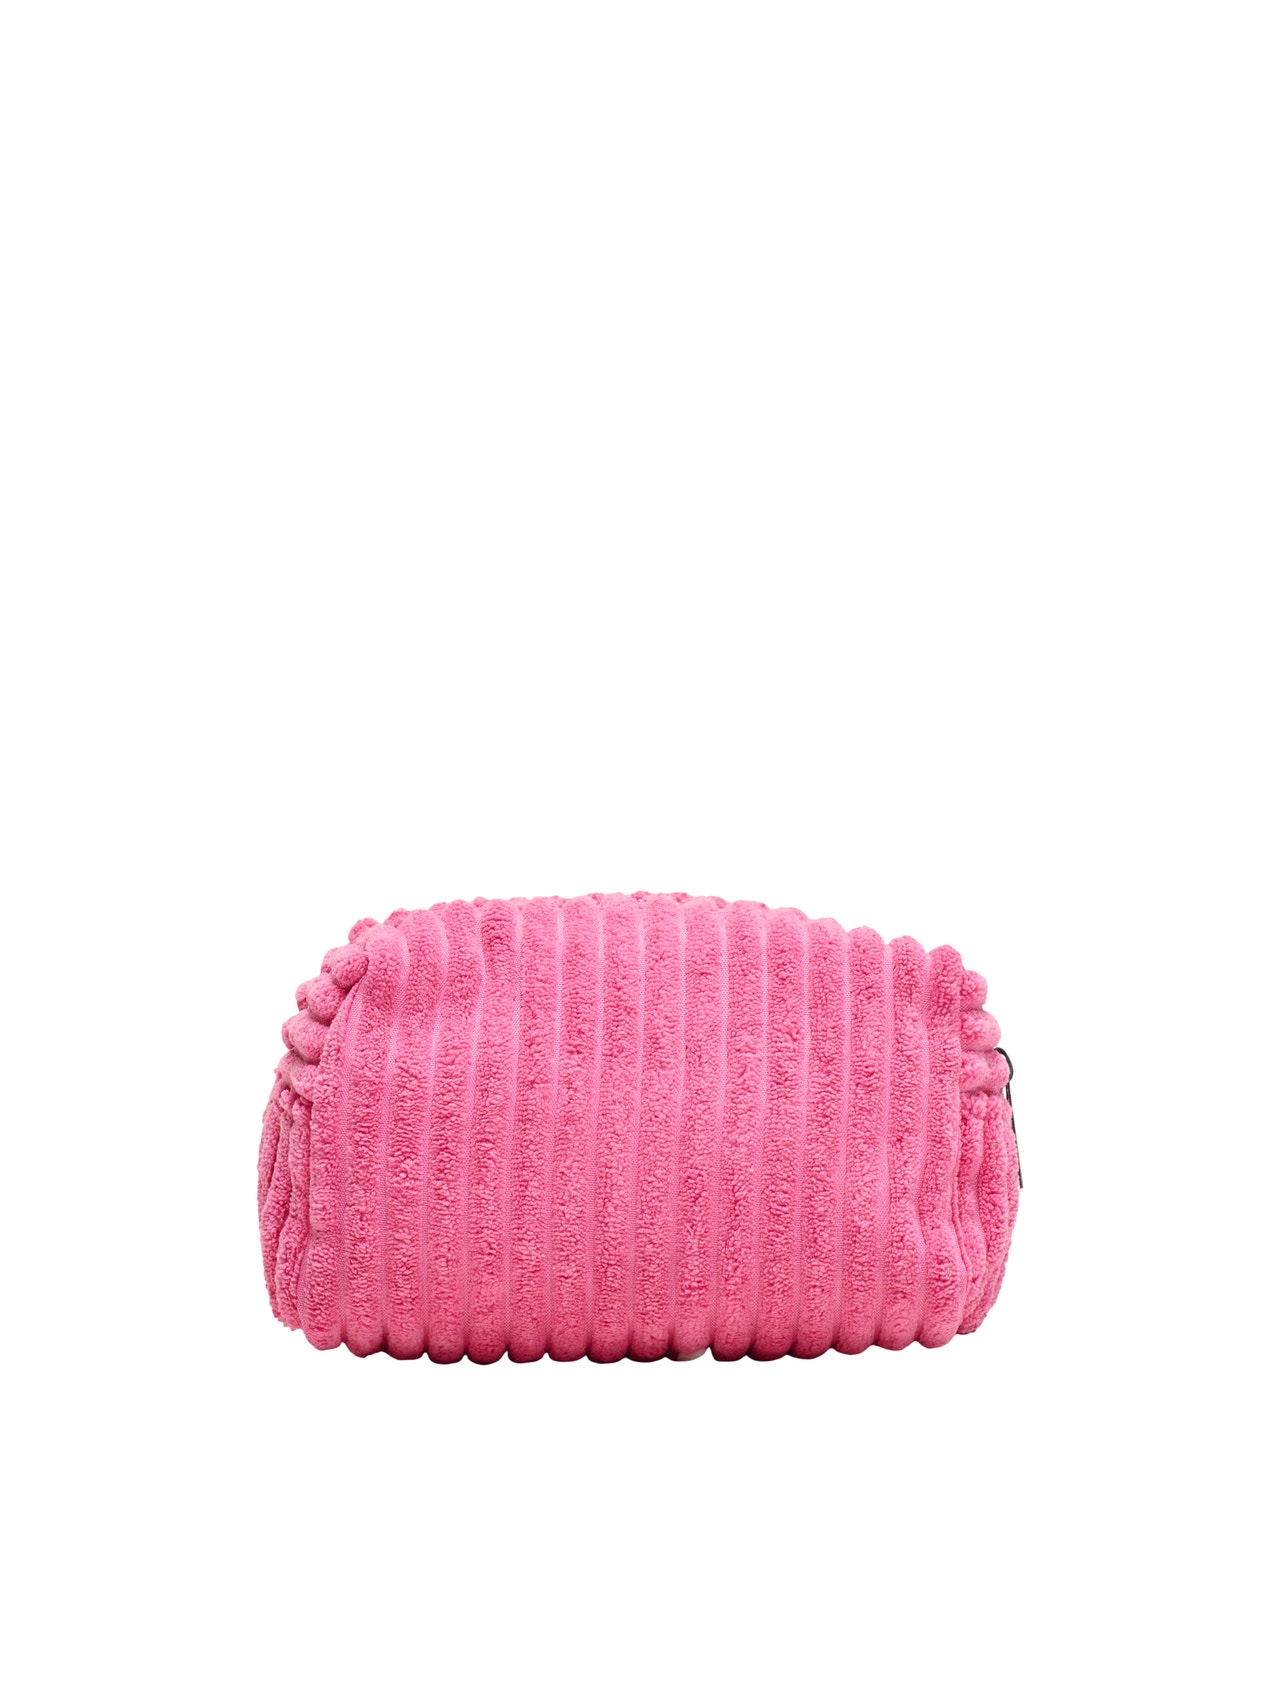 ONLY Clutch -Knockout Pink - 15313252